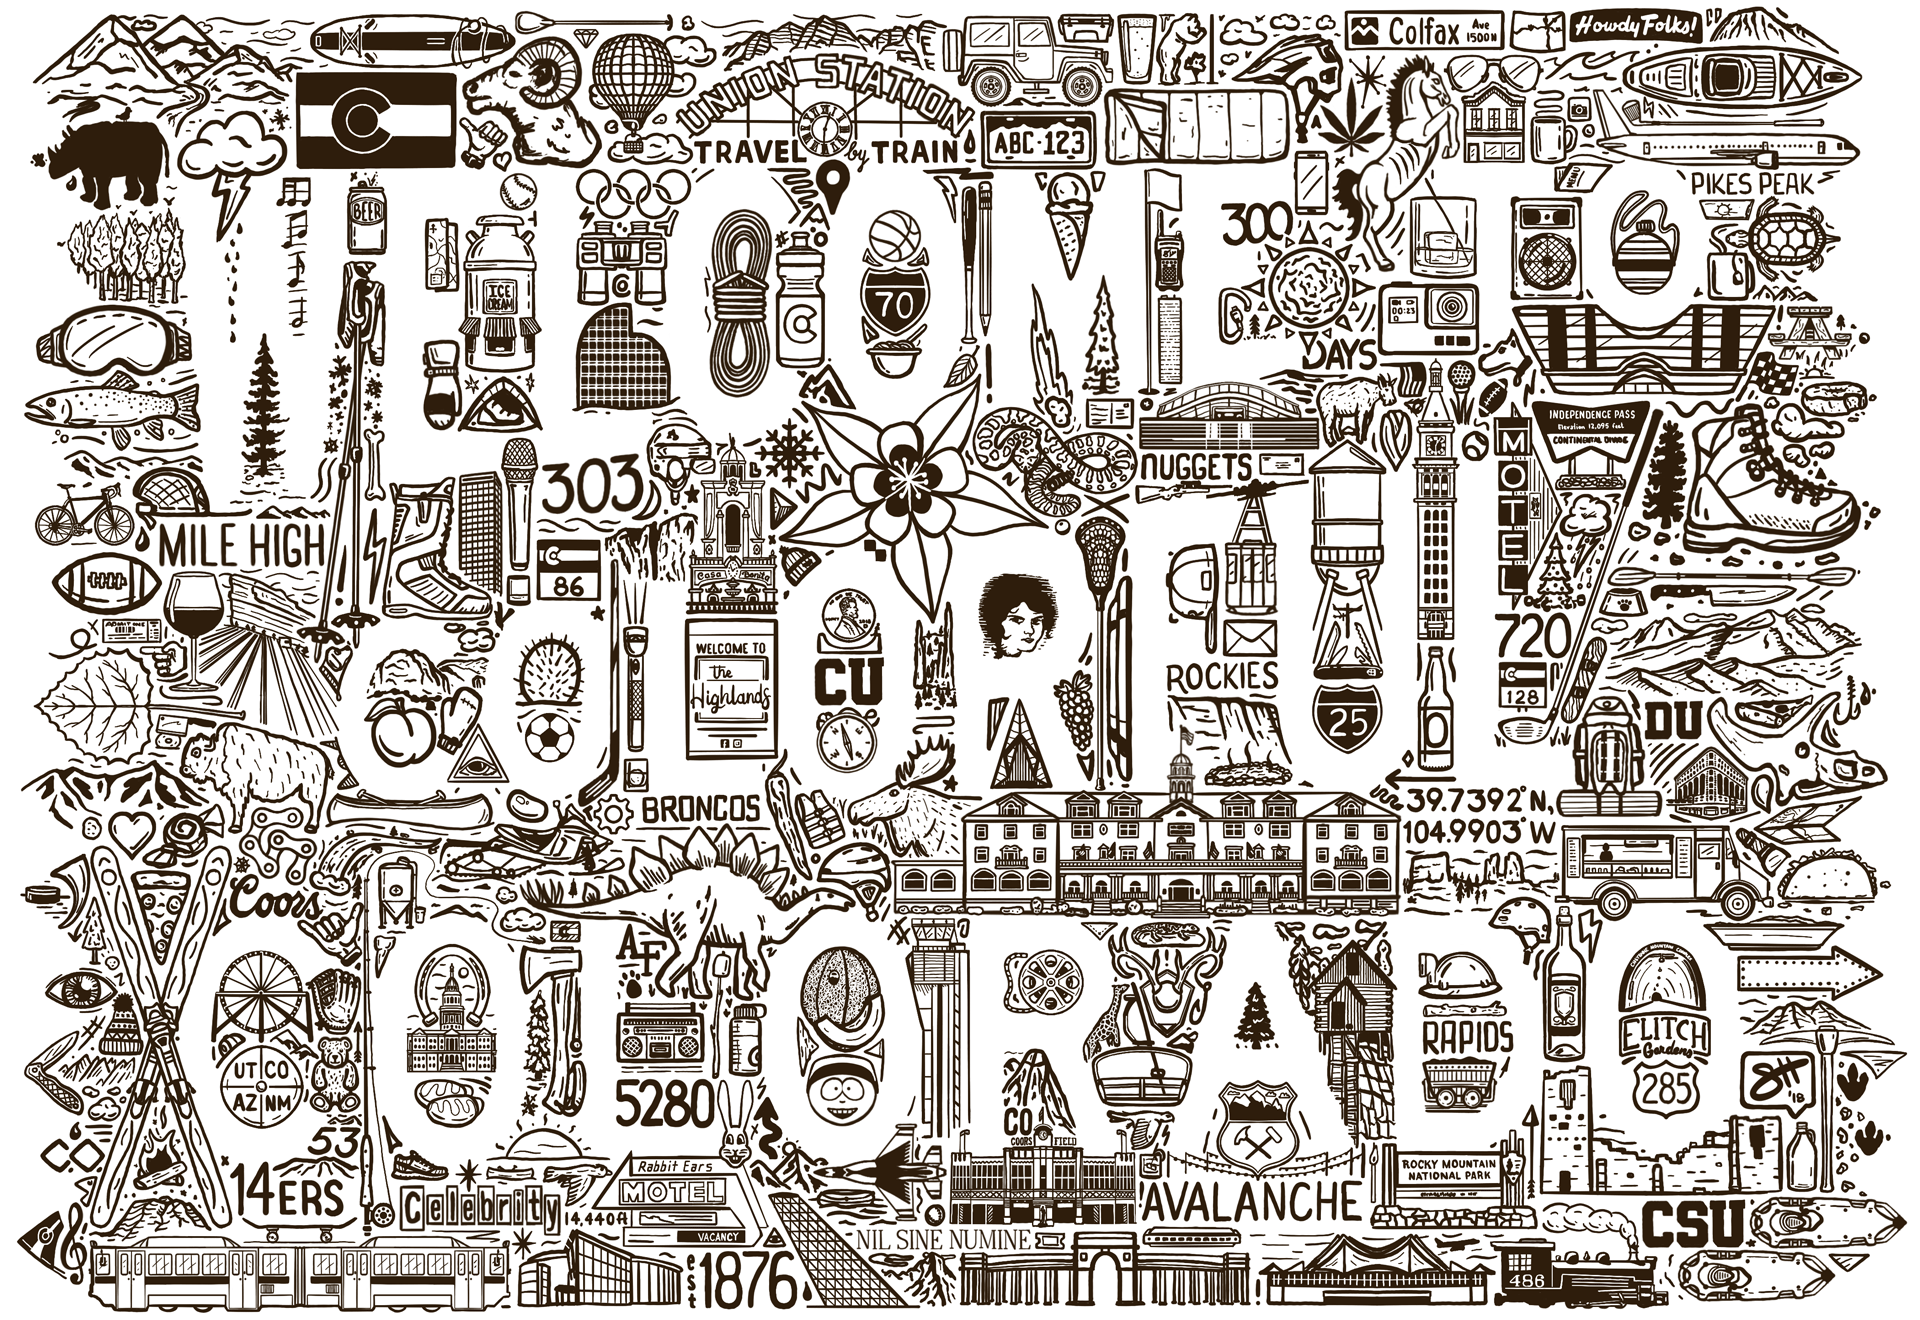 Welcome to Colorful Colorado Iconoflage